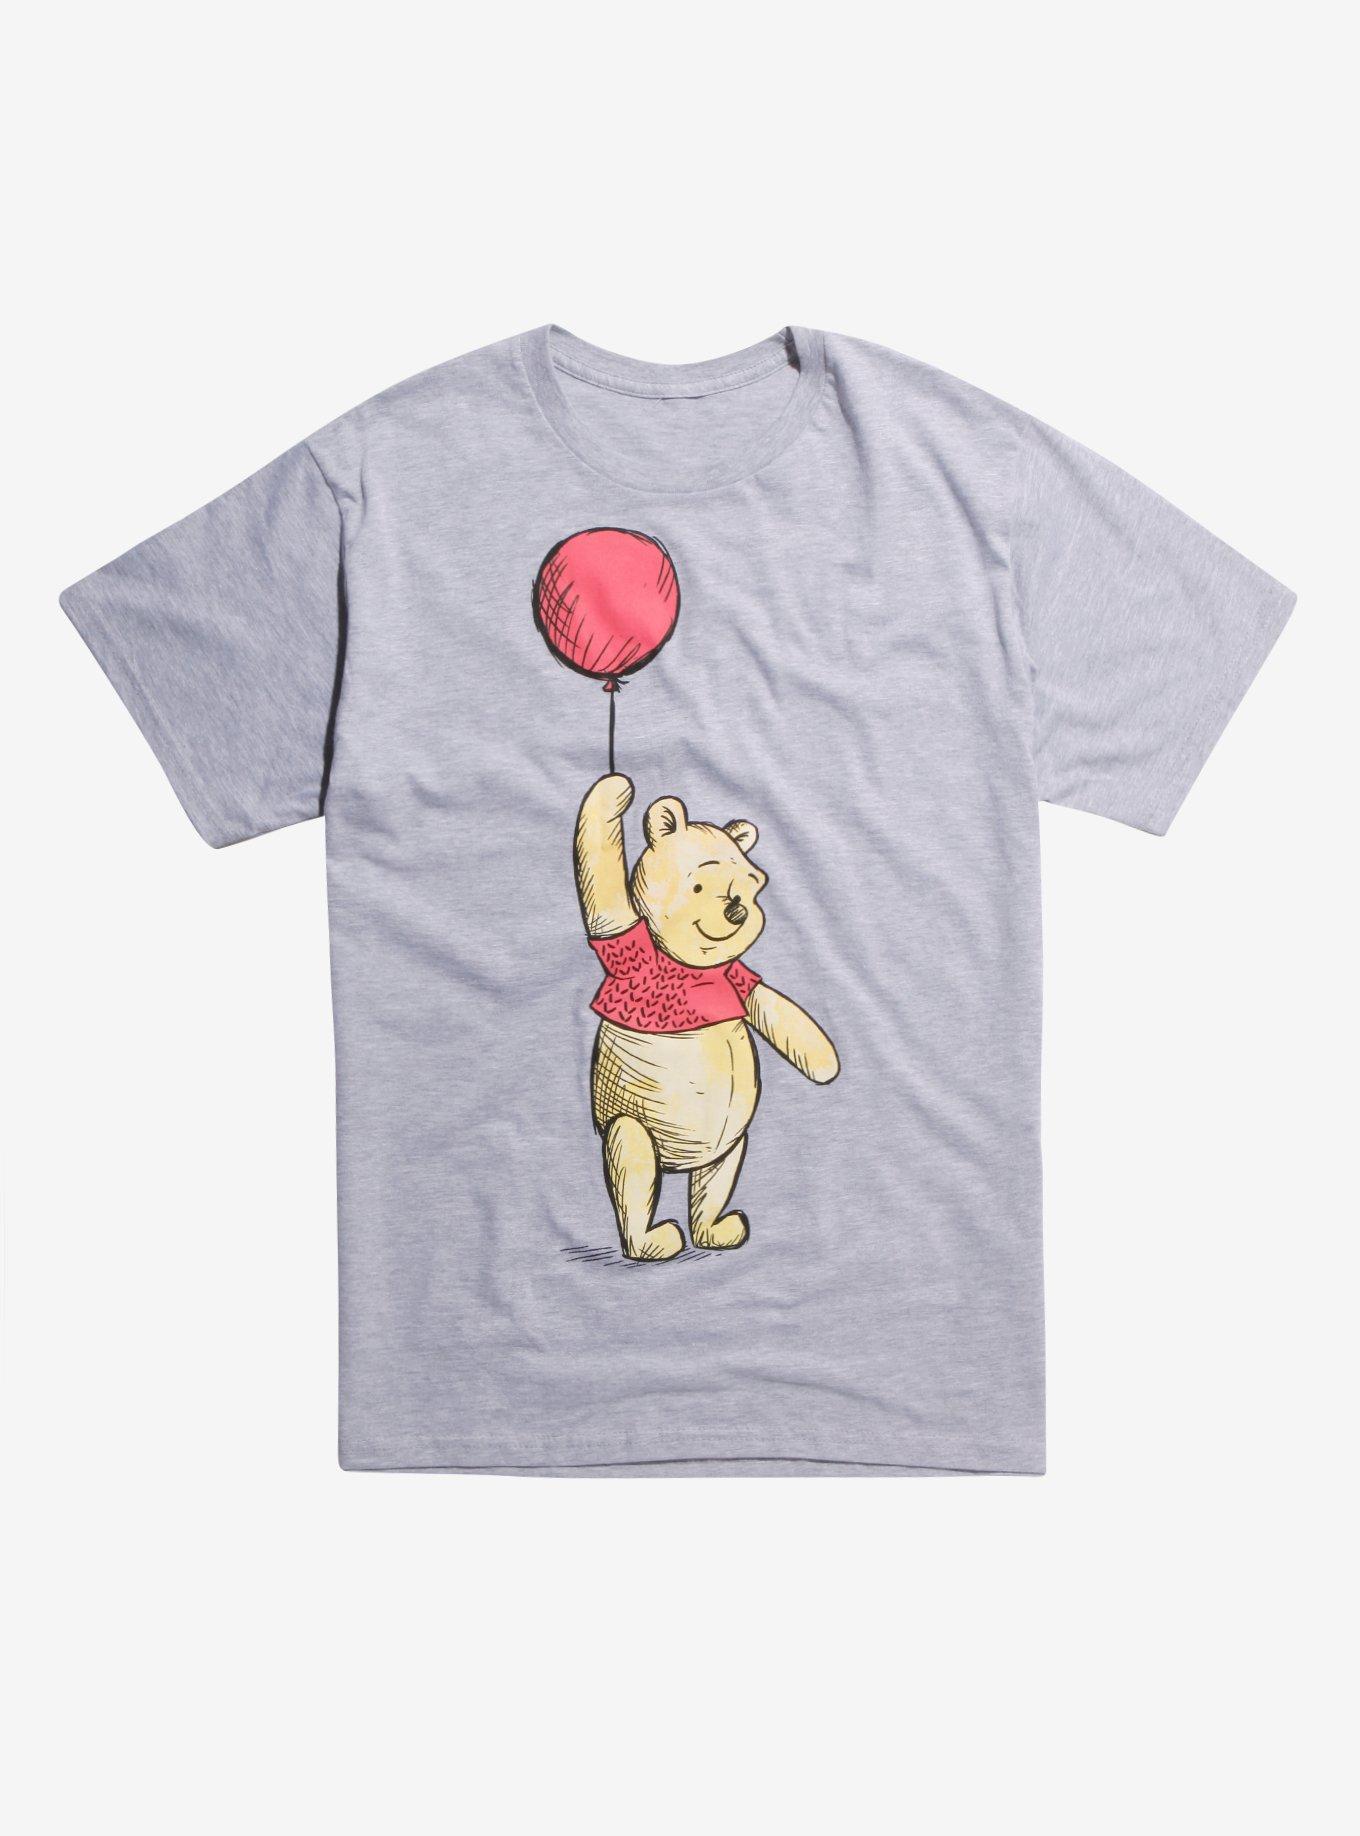 Disney Winnie The Pooh Floating Balloon T-Shirt Hot Topic Exclusive, HEATHER GREY, hi-res